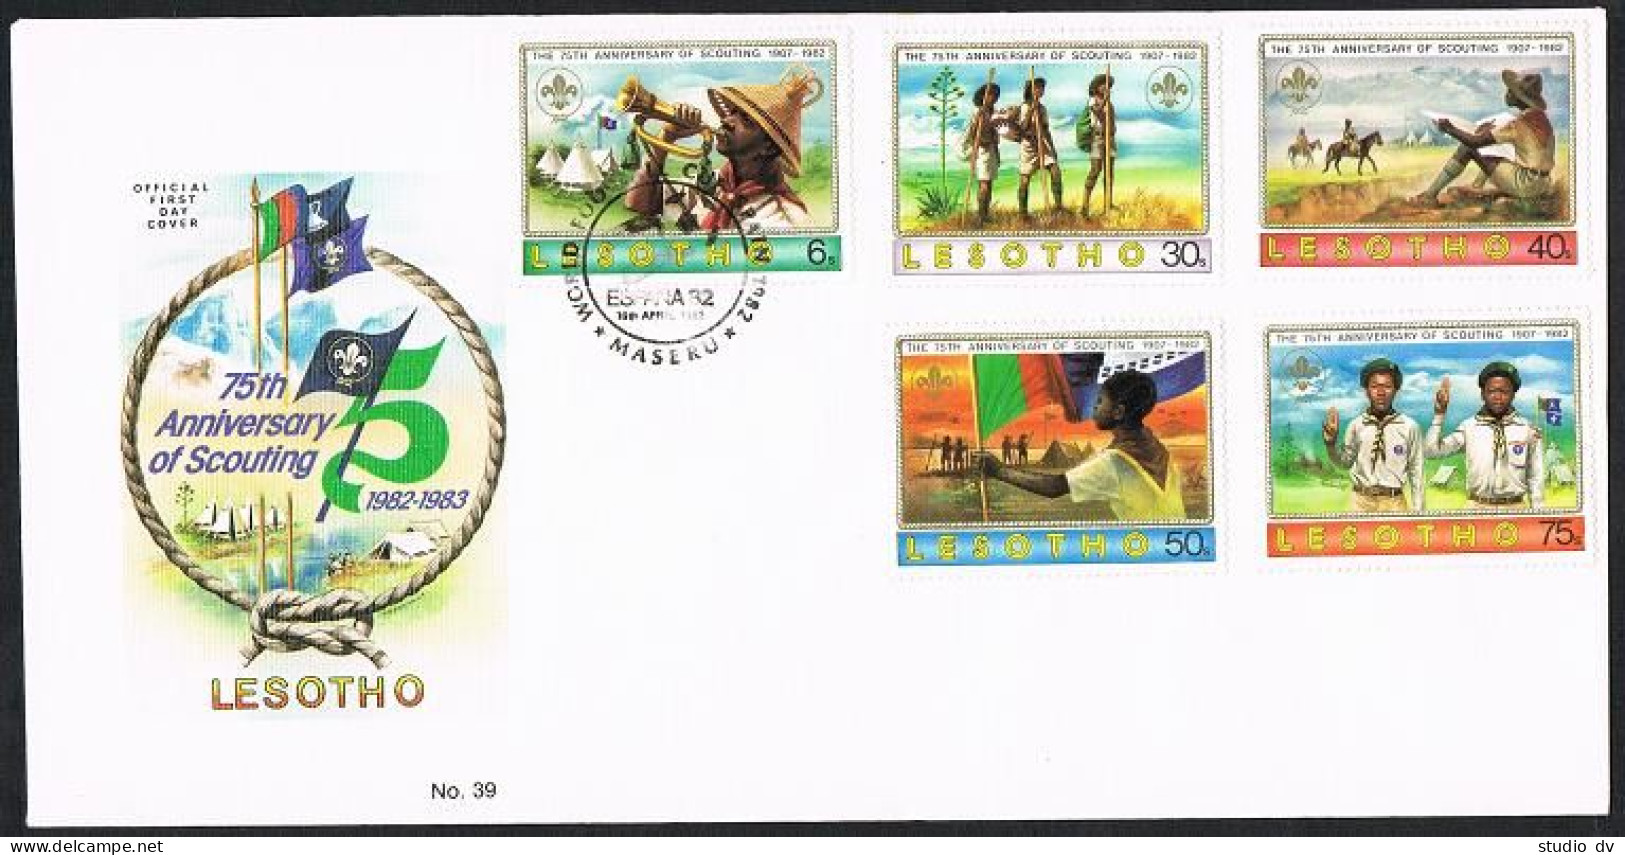 Lesotho 357-361, FDC. Michel 367-371. Scouting Year 1982.Flags,Horse,Bugle Call, - Lesotho (1966-...)